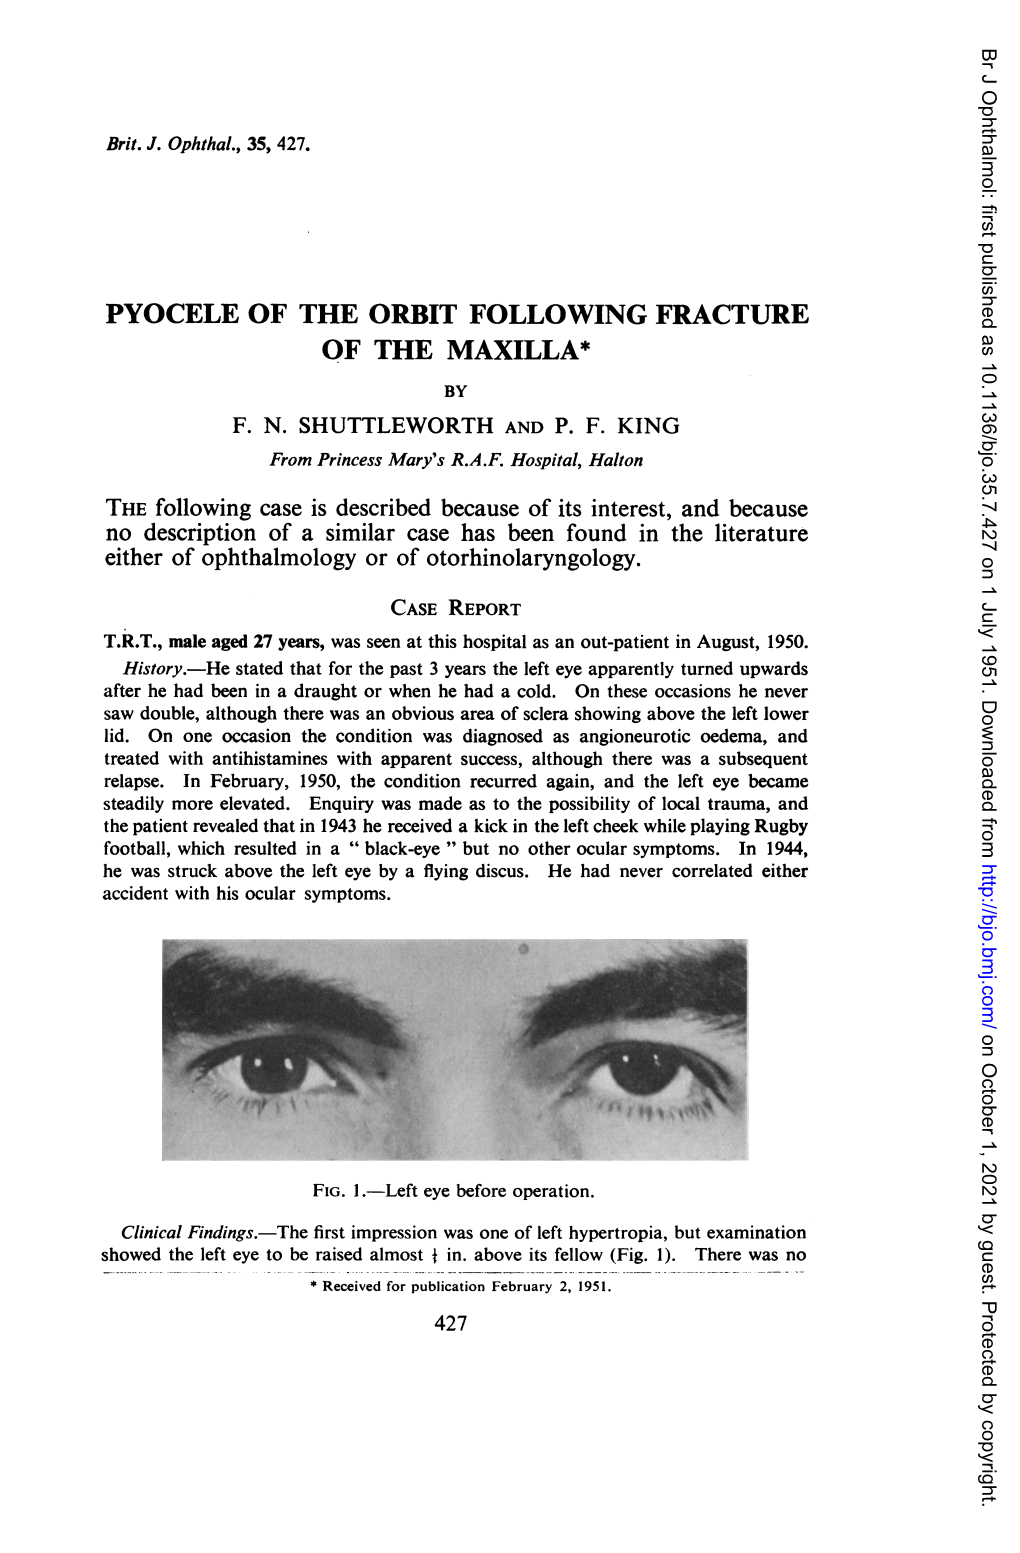 Pyocele of the Orbit Following Fracture of the Maxilla* by F